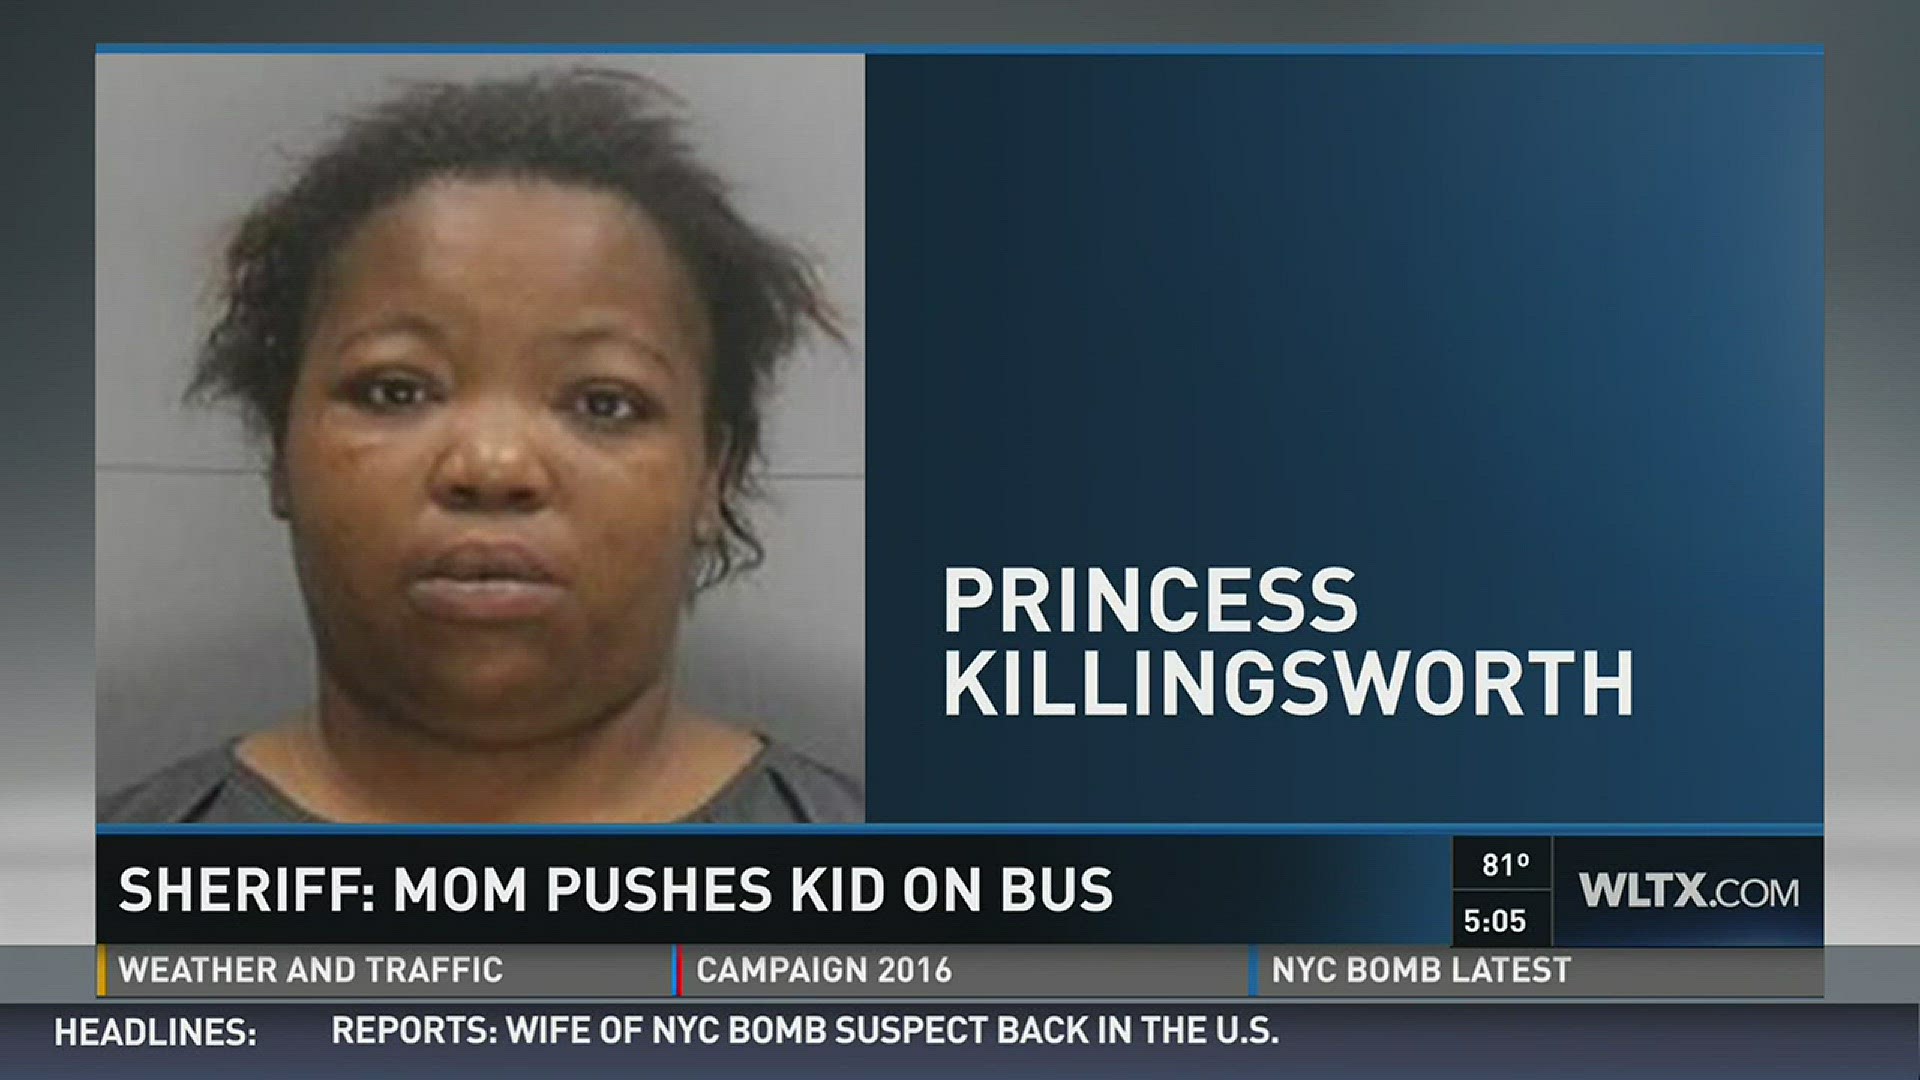 Deputies say she was upset because her child was getting bullied.